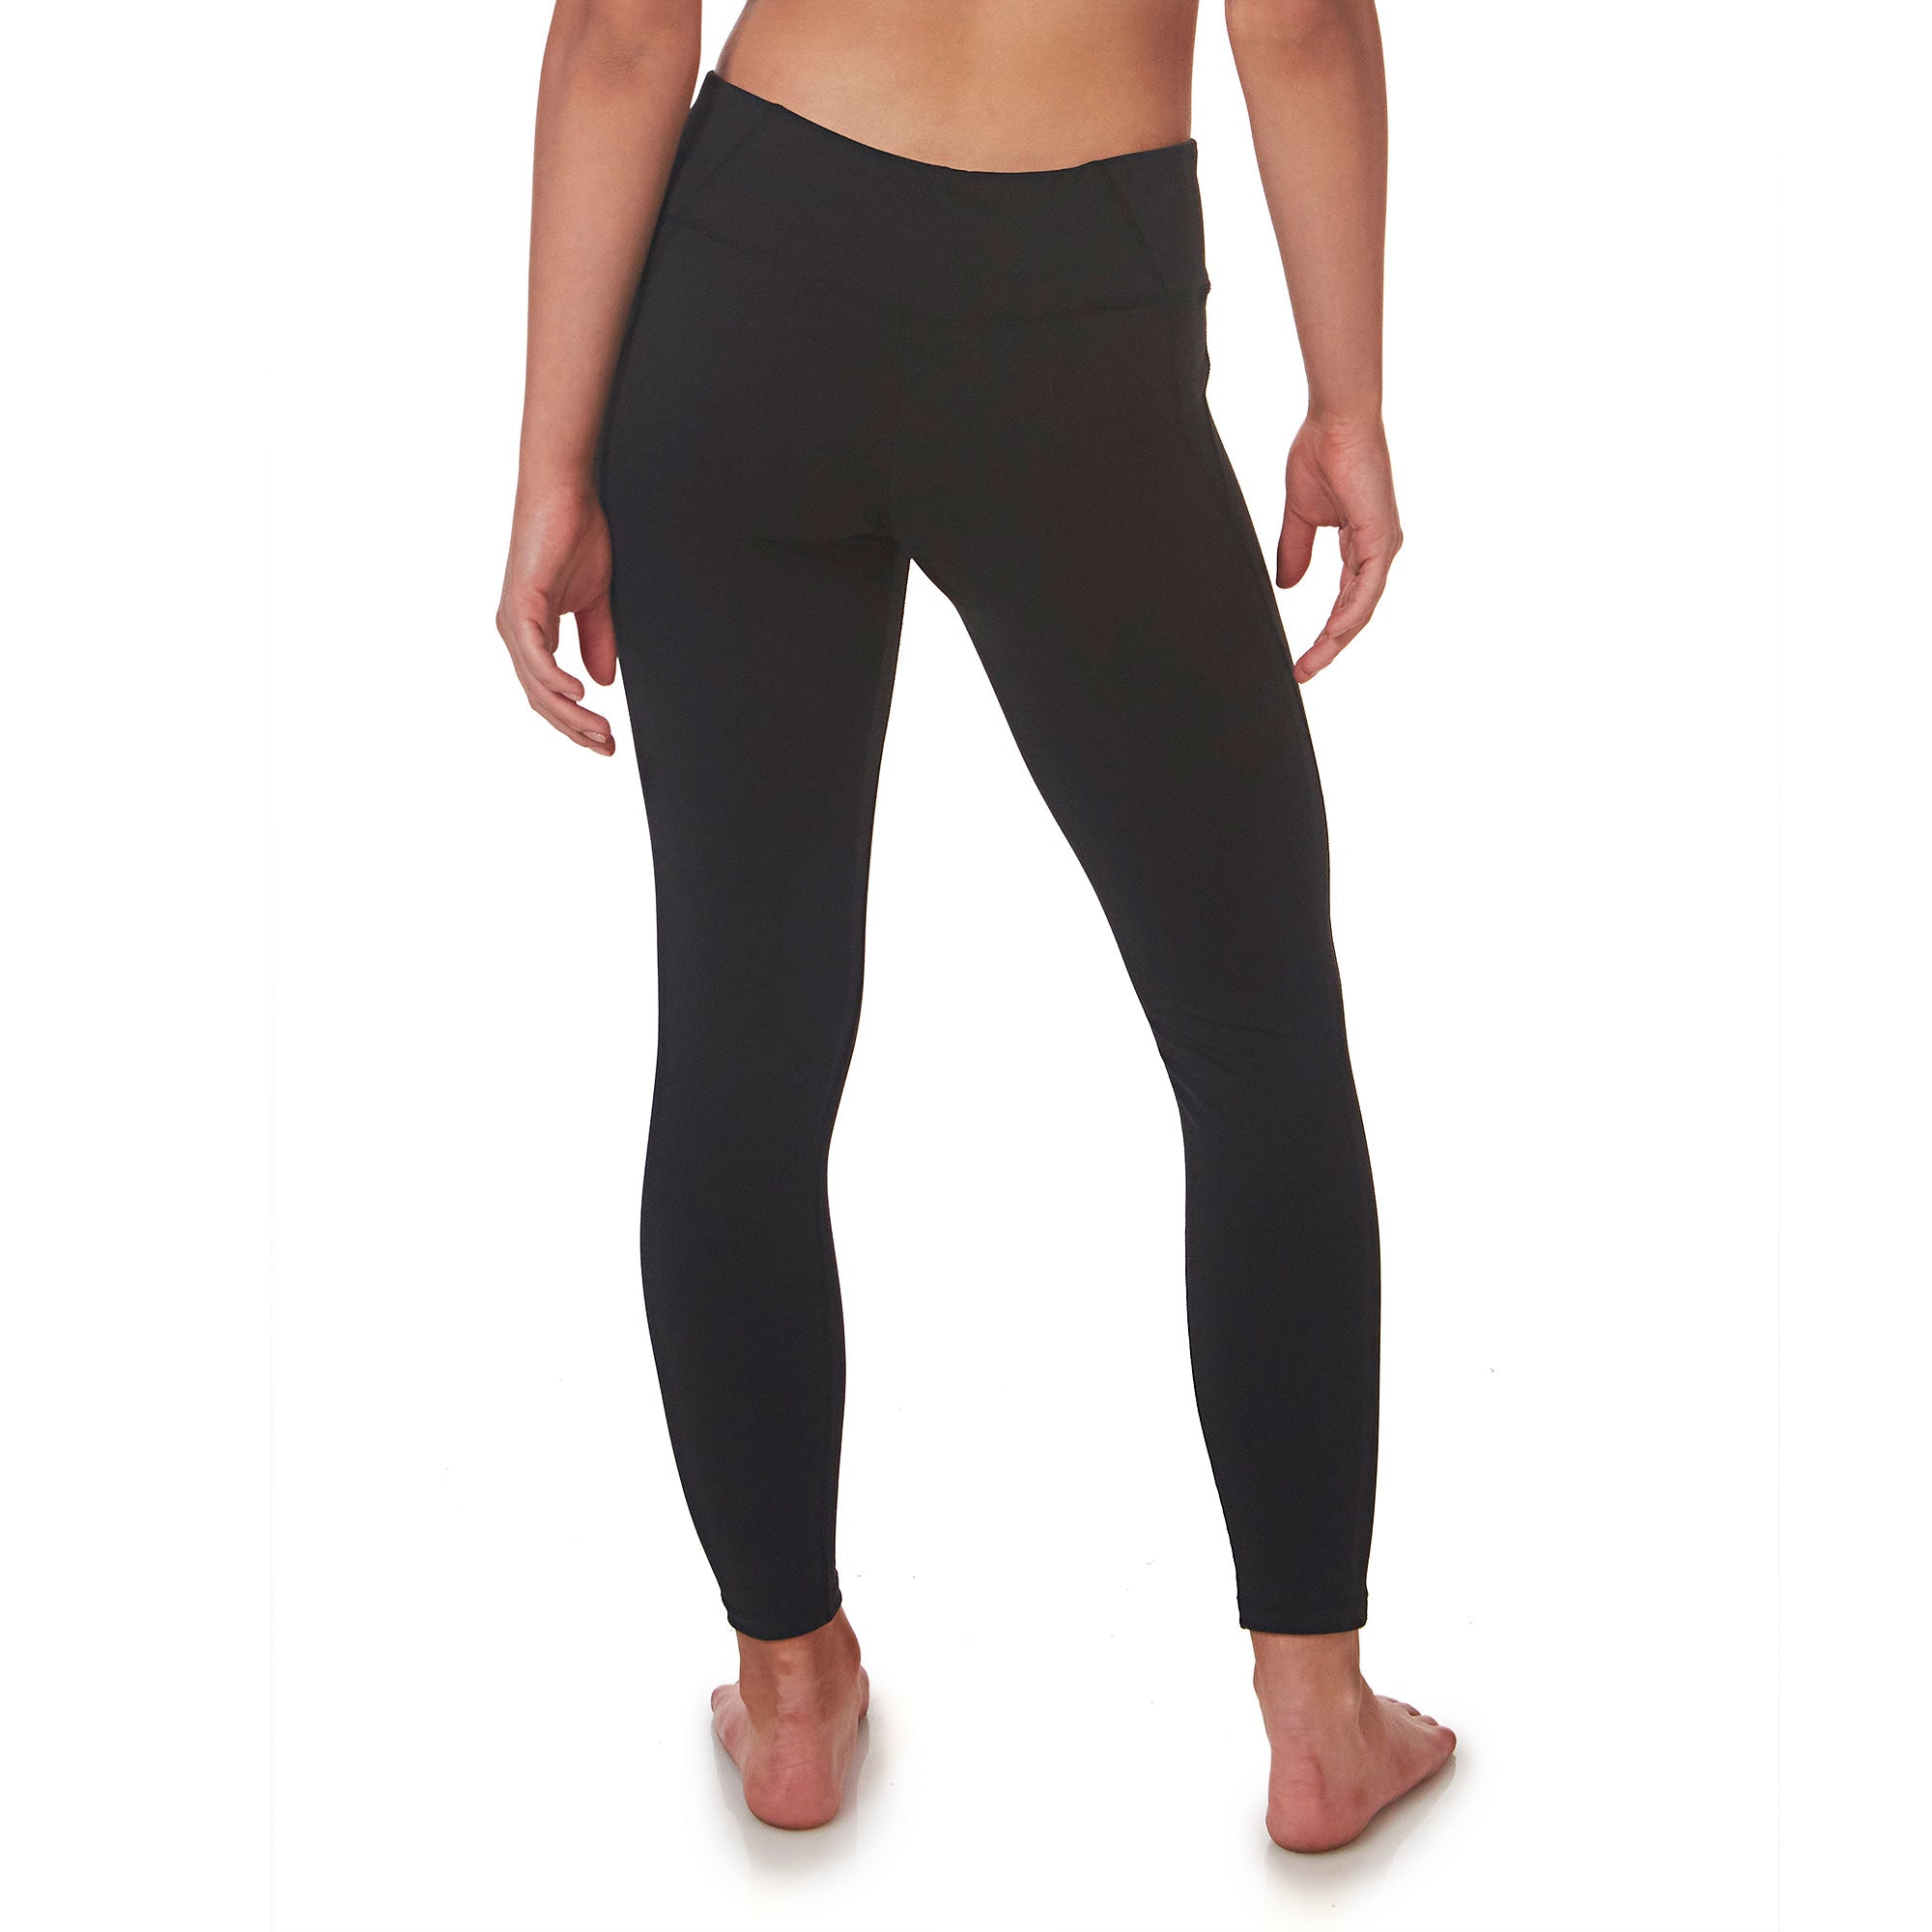 SEVEGO Women's Extra Long Yoga Leggings with Pockets Over The Heel Stacked  Legging Barre Dance Athletic Pants, Black, S at  Women's Clothing  store